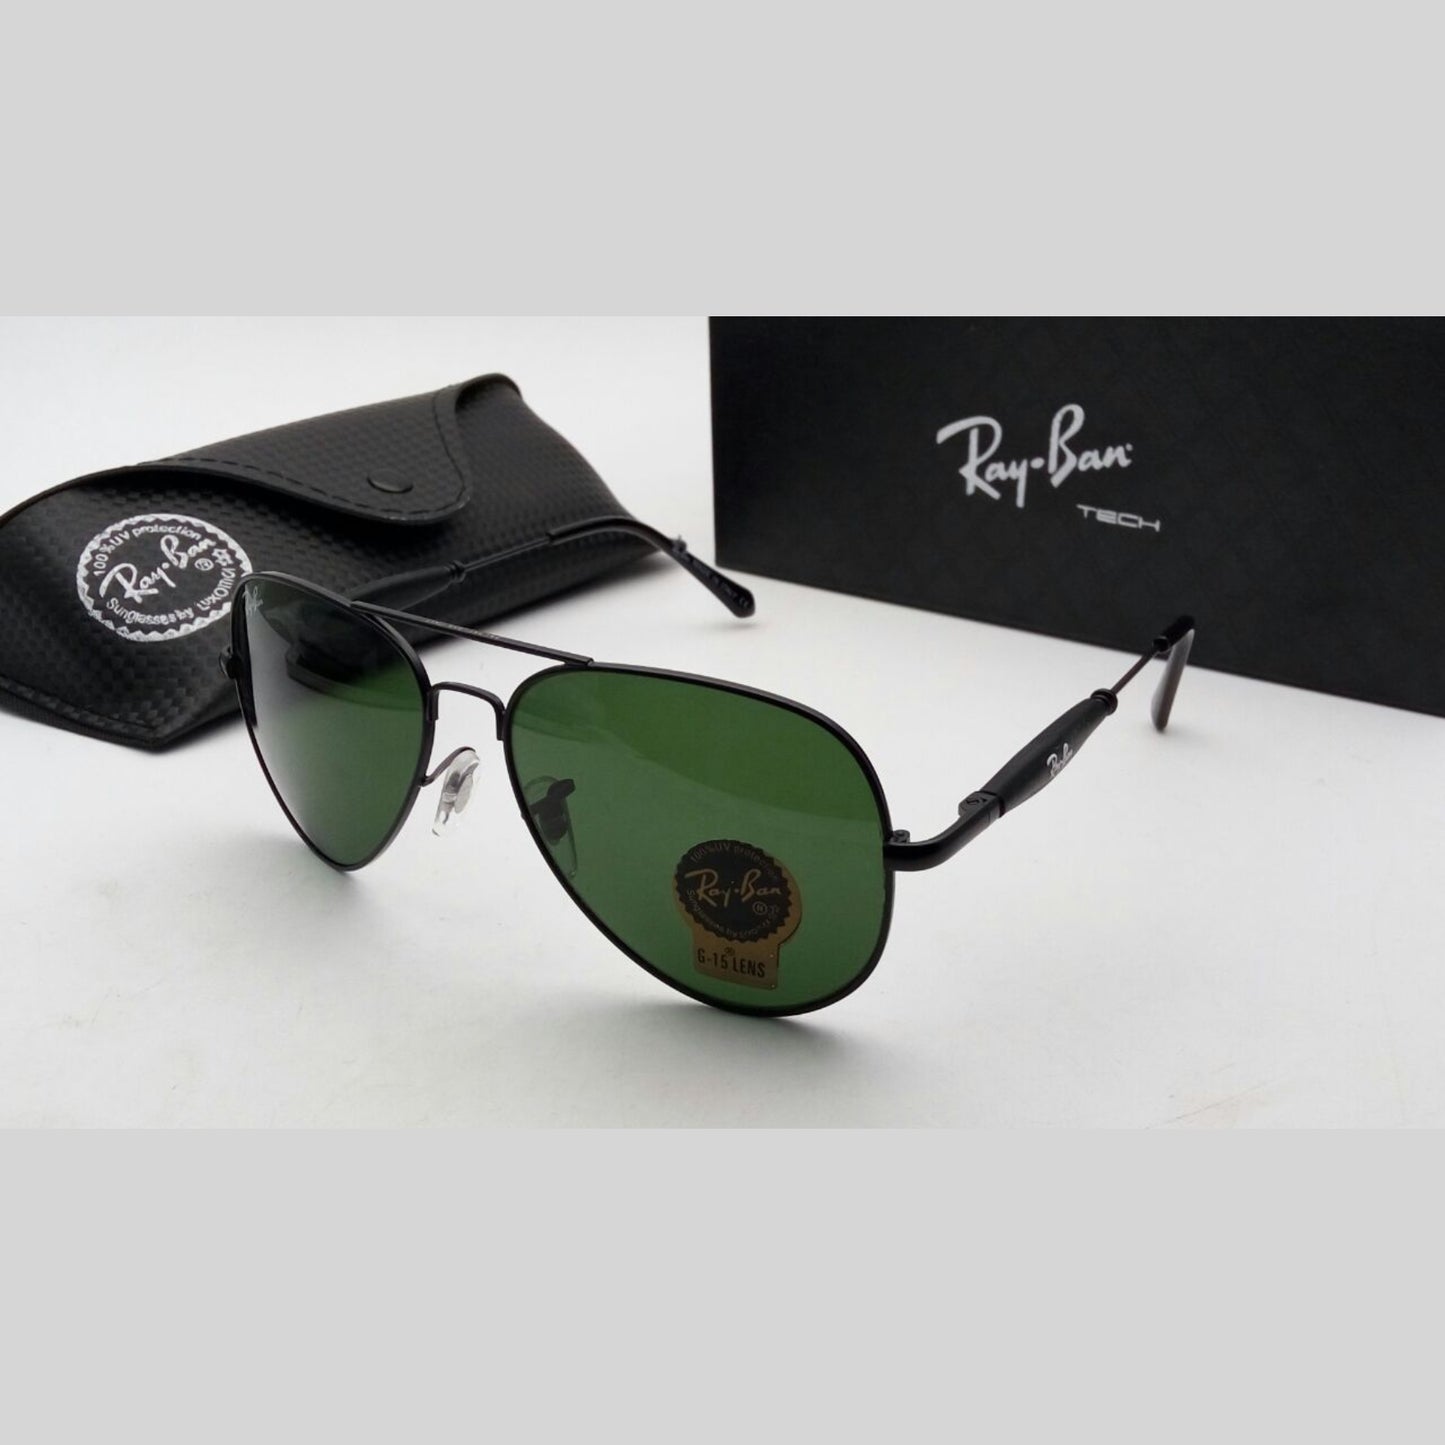 Green & Black 3517 Oval Trendy Hot Favourite Wintage Sunglass For Unisex.